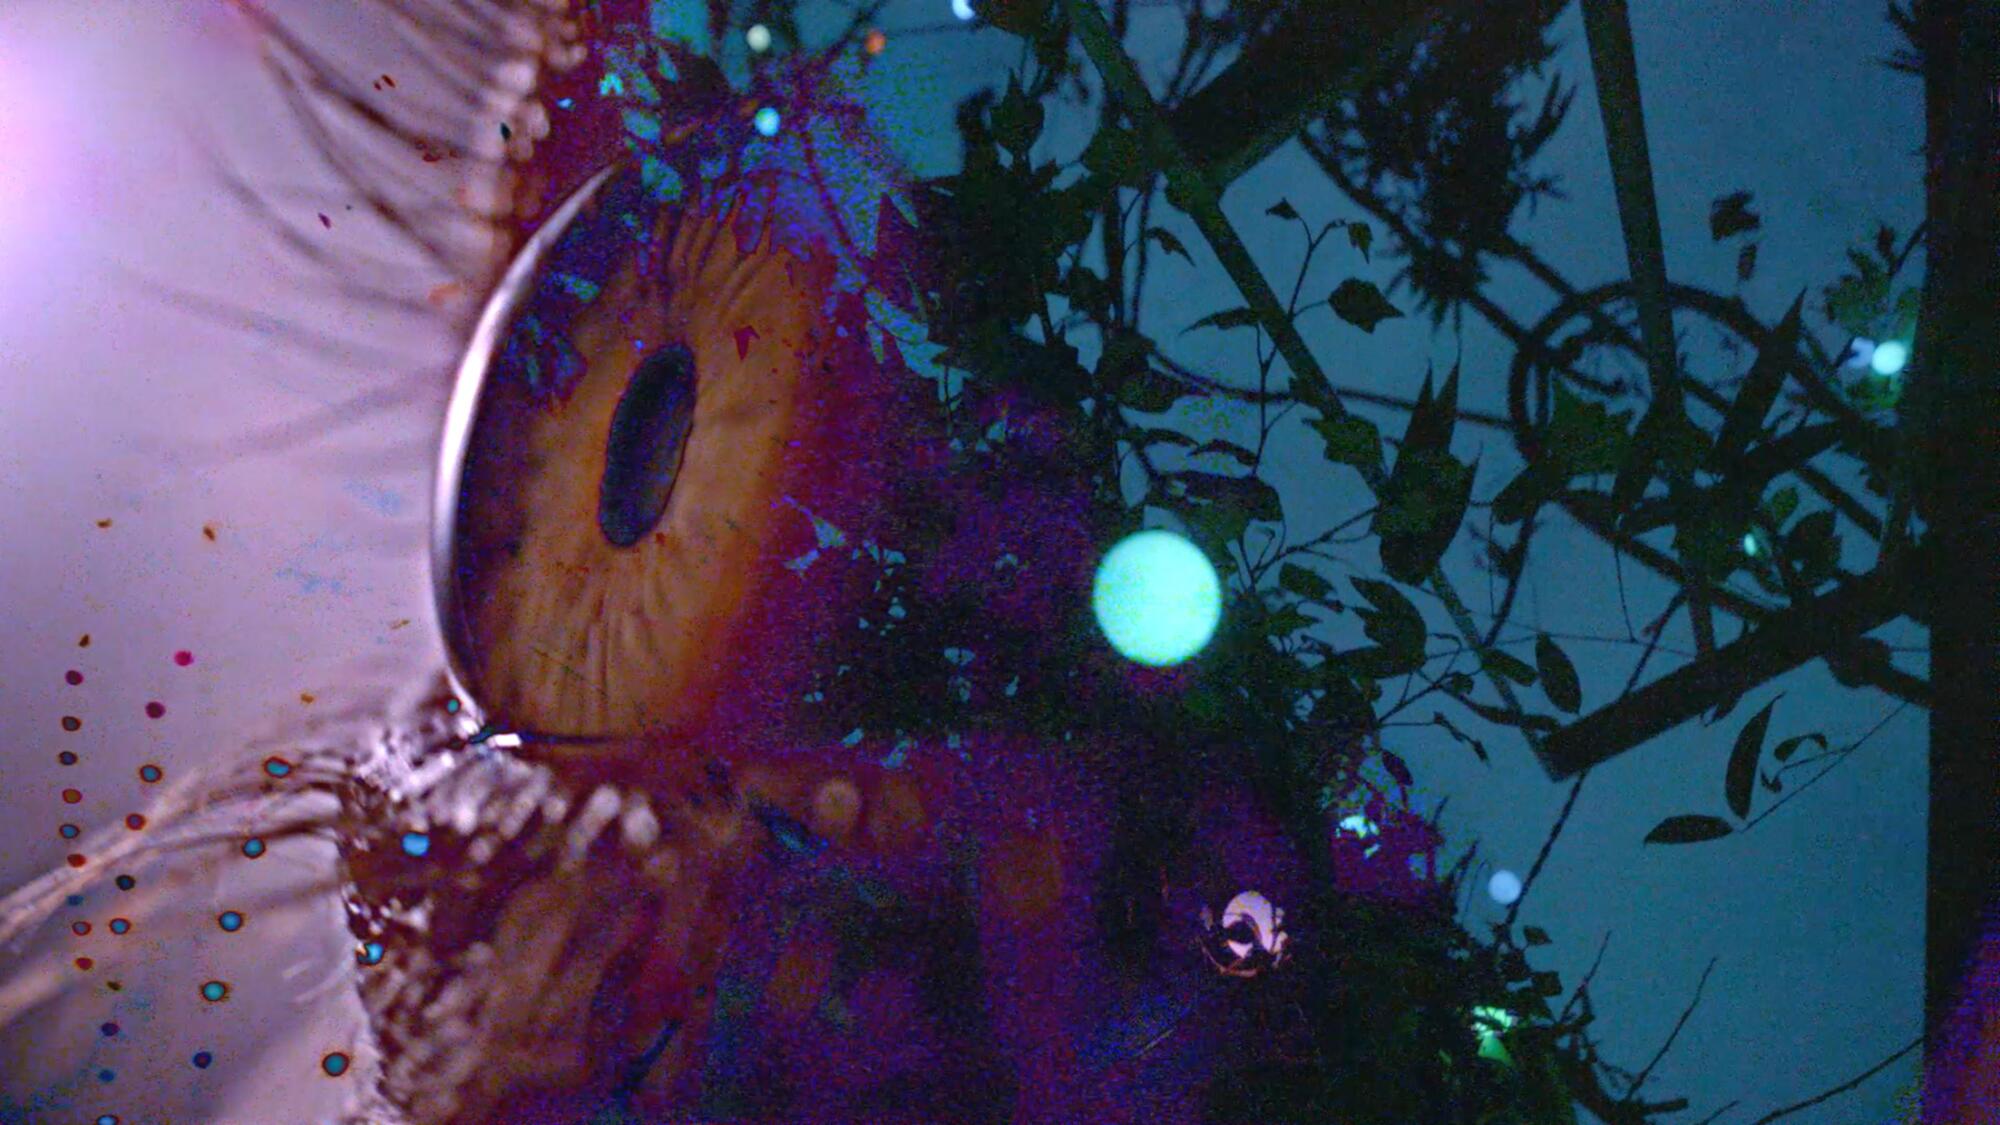 A video still shows a close-up of an eye against vegetation and a purple sky.